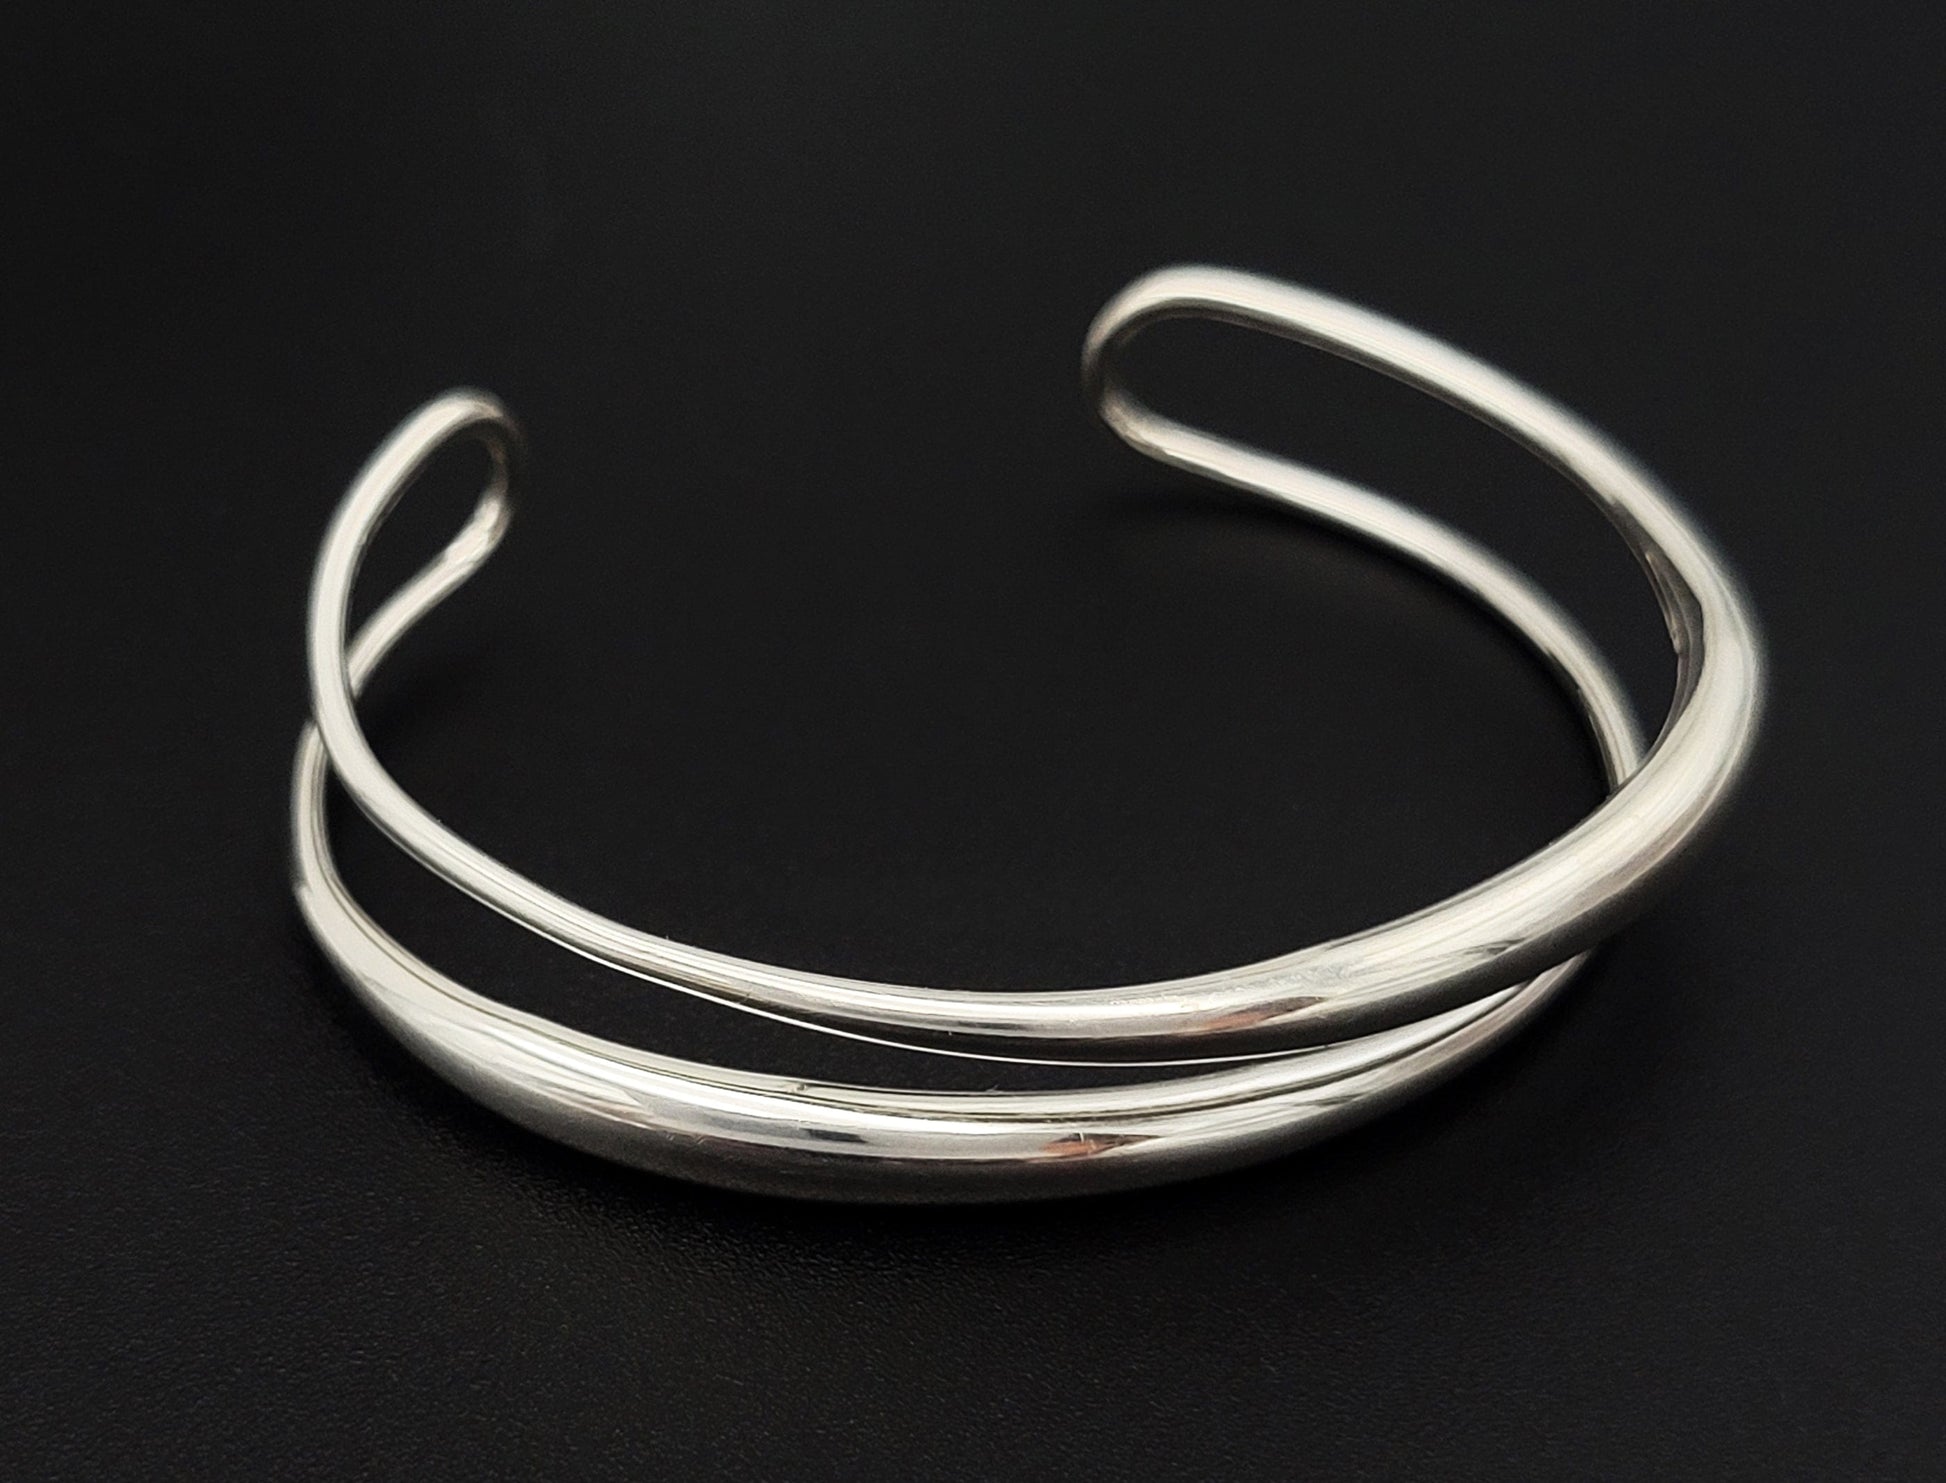 Ed Levin Jewelry Superb Iconic Ed Levin Sterling Silver Modernist Cuff Bracelet 1960/70s